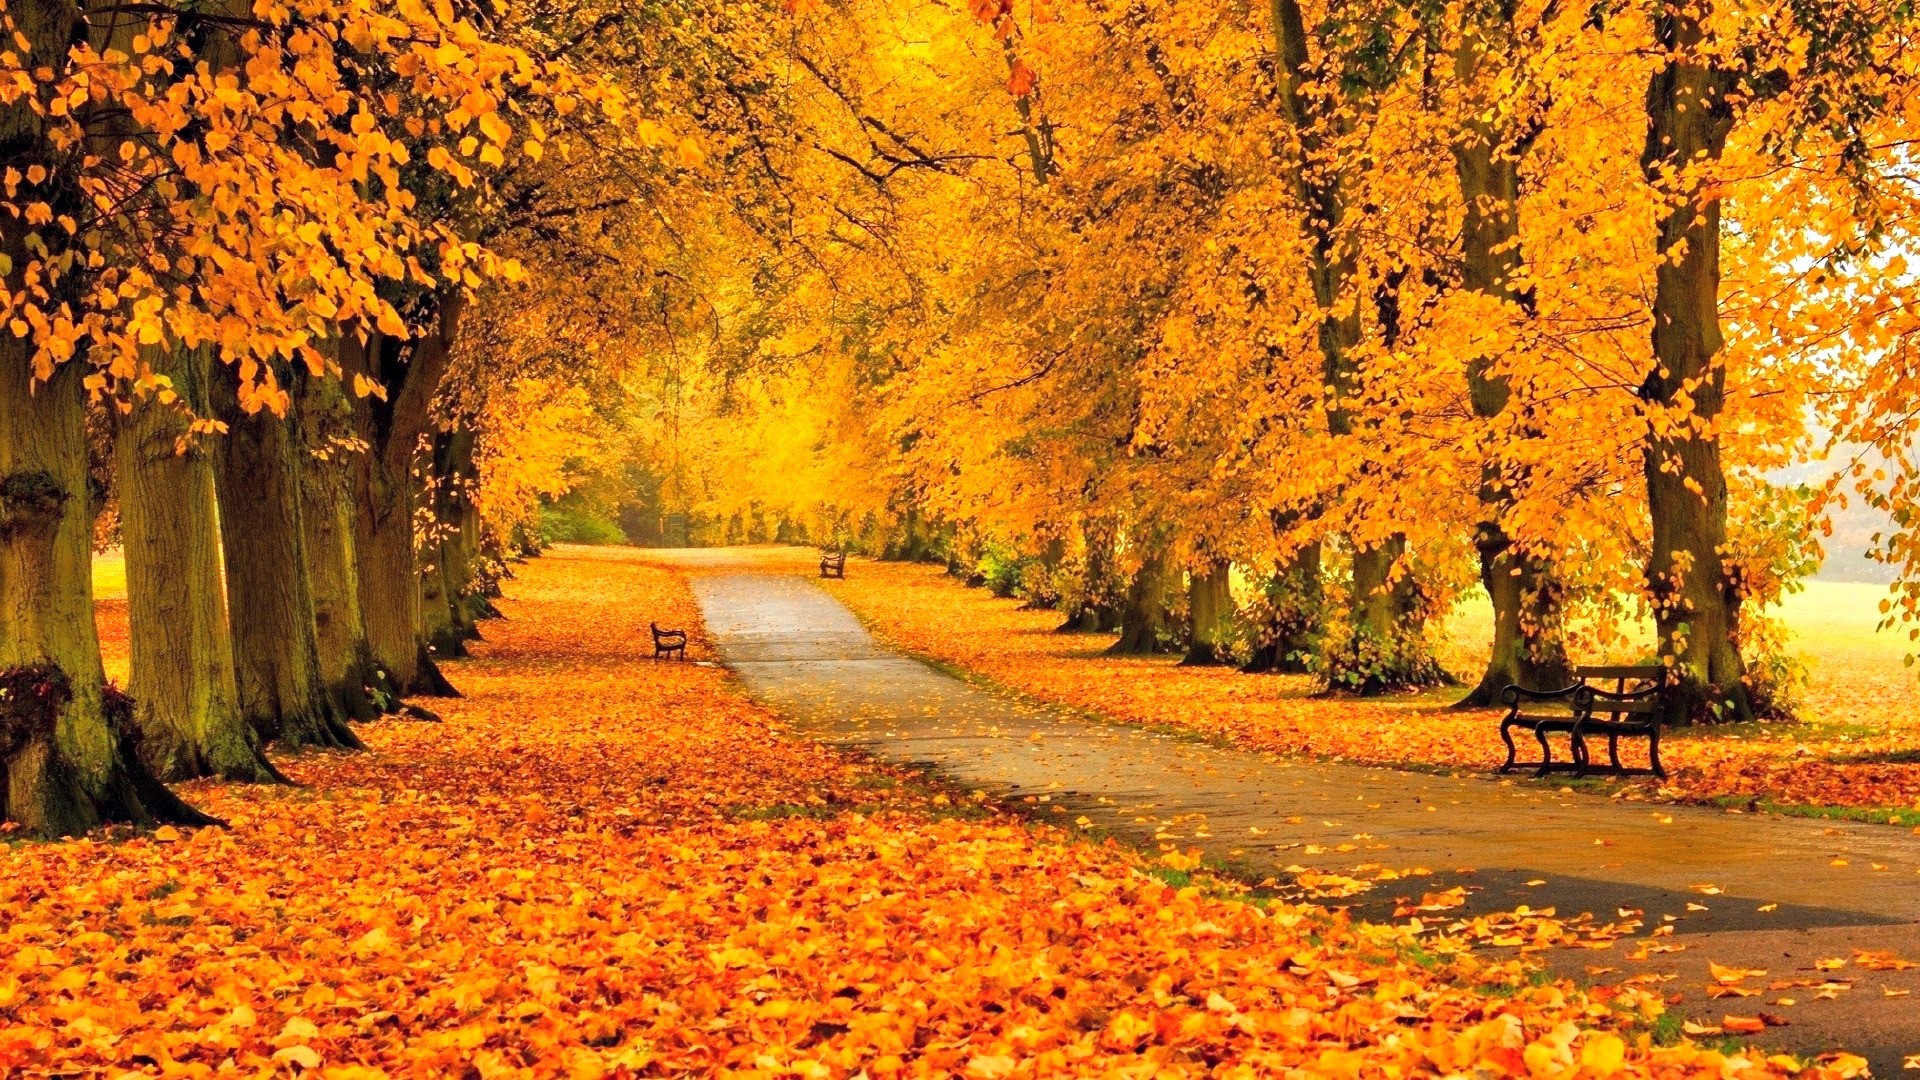 Other: Autumn Park Path Sidewalk Trees Benches Fall Leaves Walkway ...